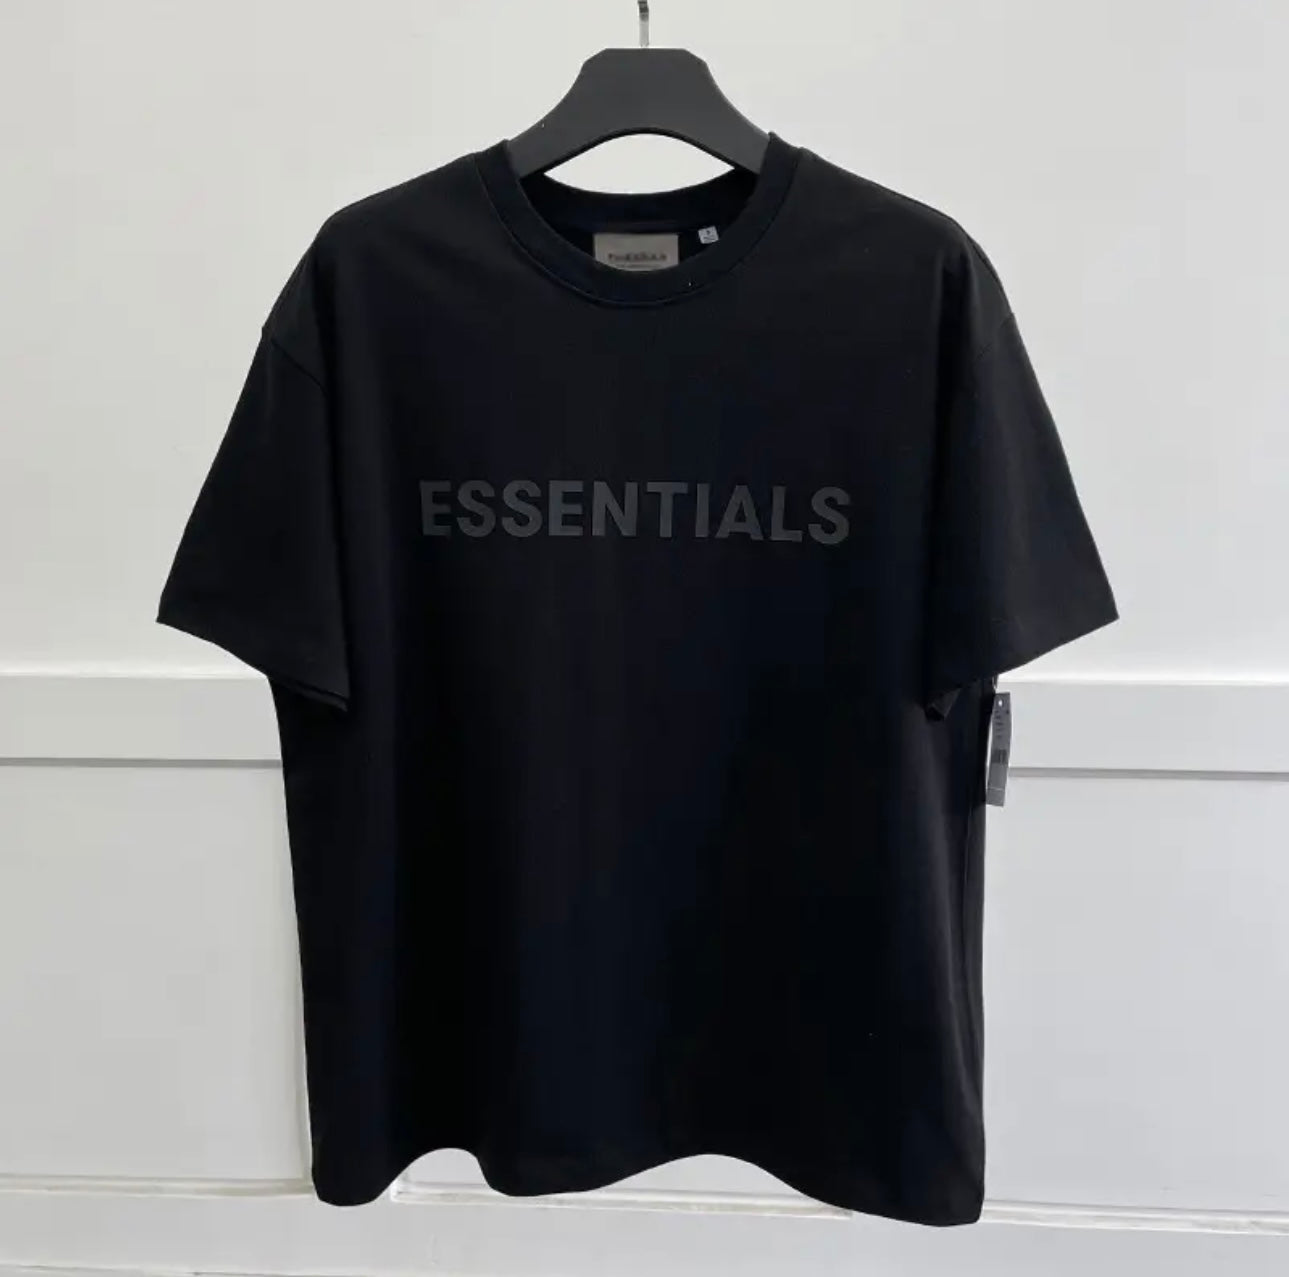 ESSENTIALS Fear of God Men's Short Sleeve Casual Over-Sized T-shirt for Men - Letter Printing Across Chest